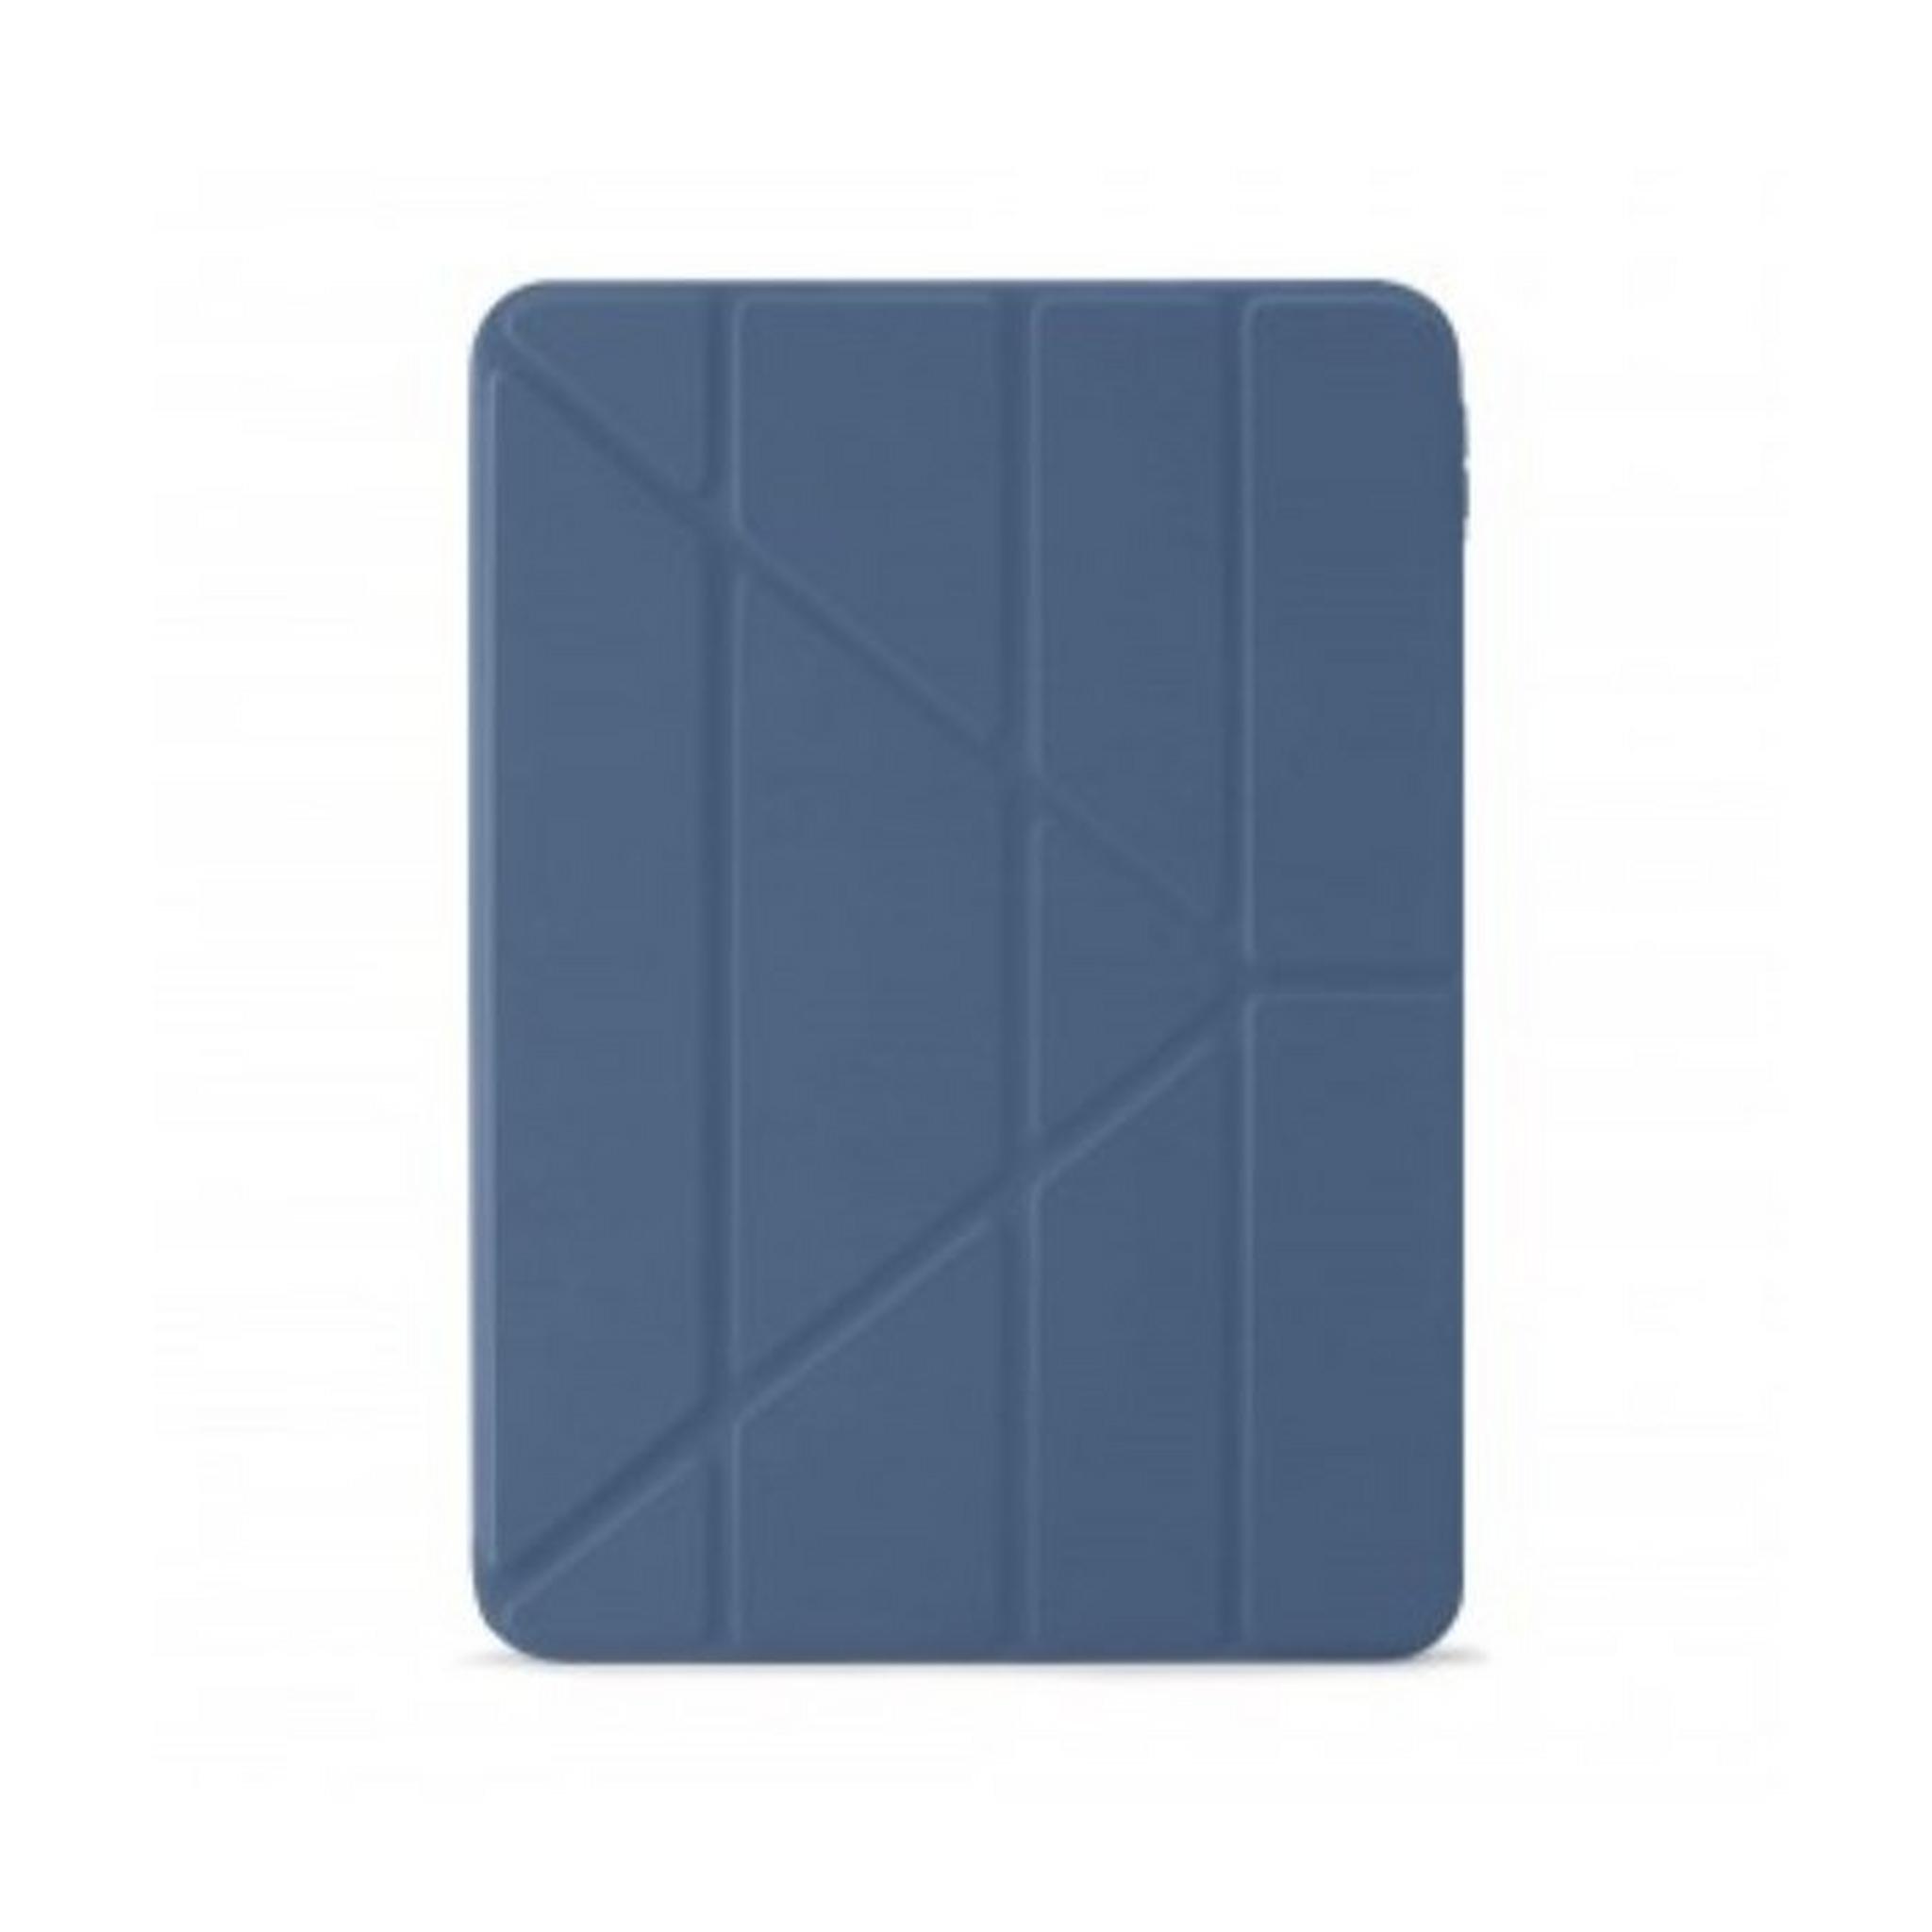 Pipetto iPad Air 4 10.9 inch Origami Case - Navy